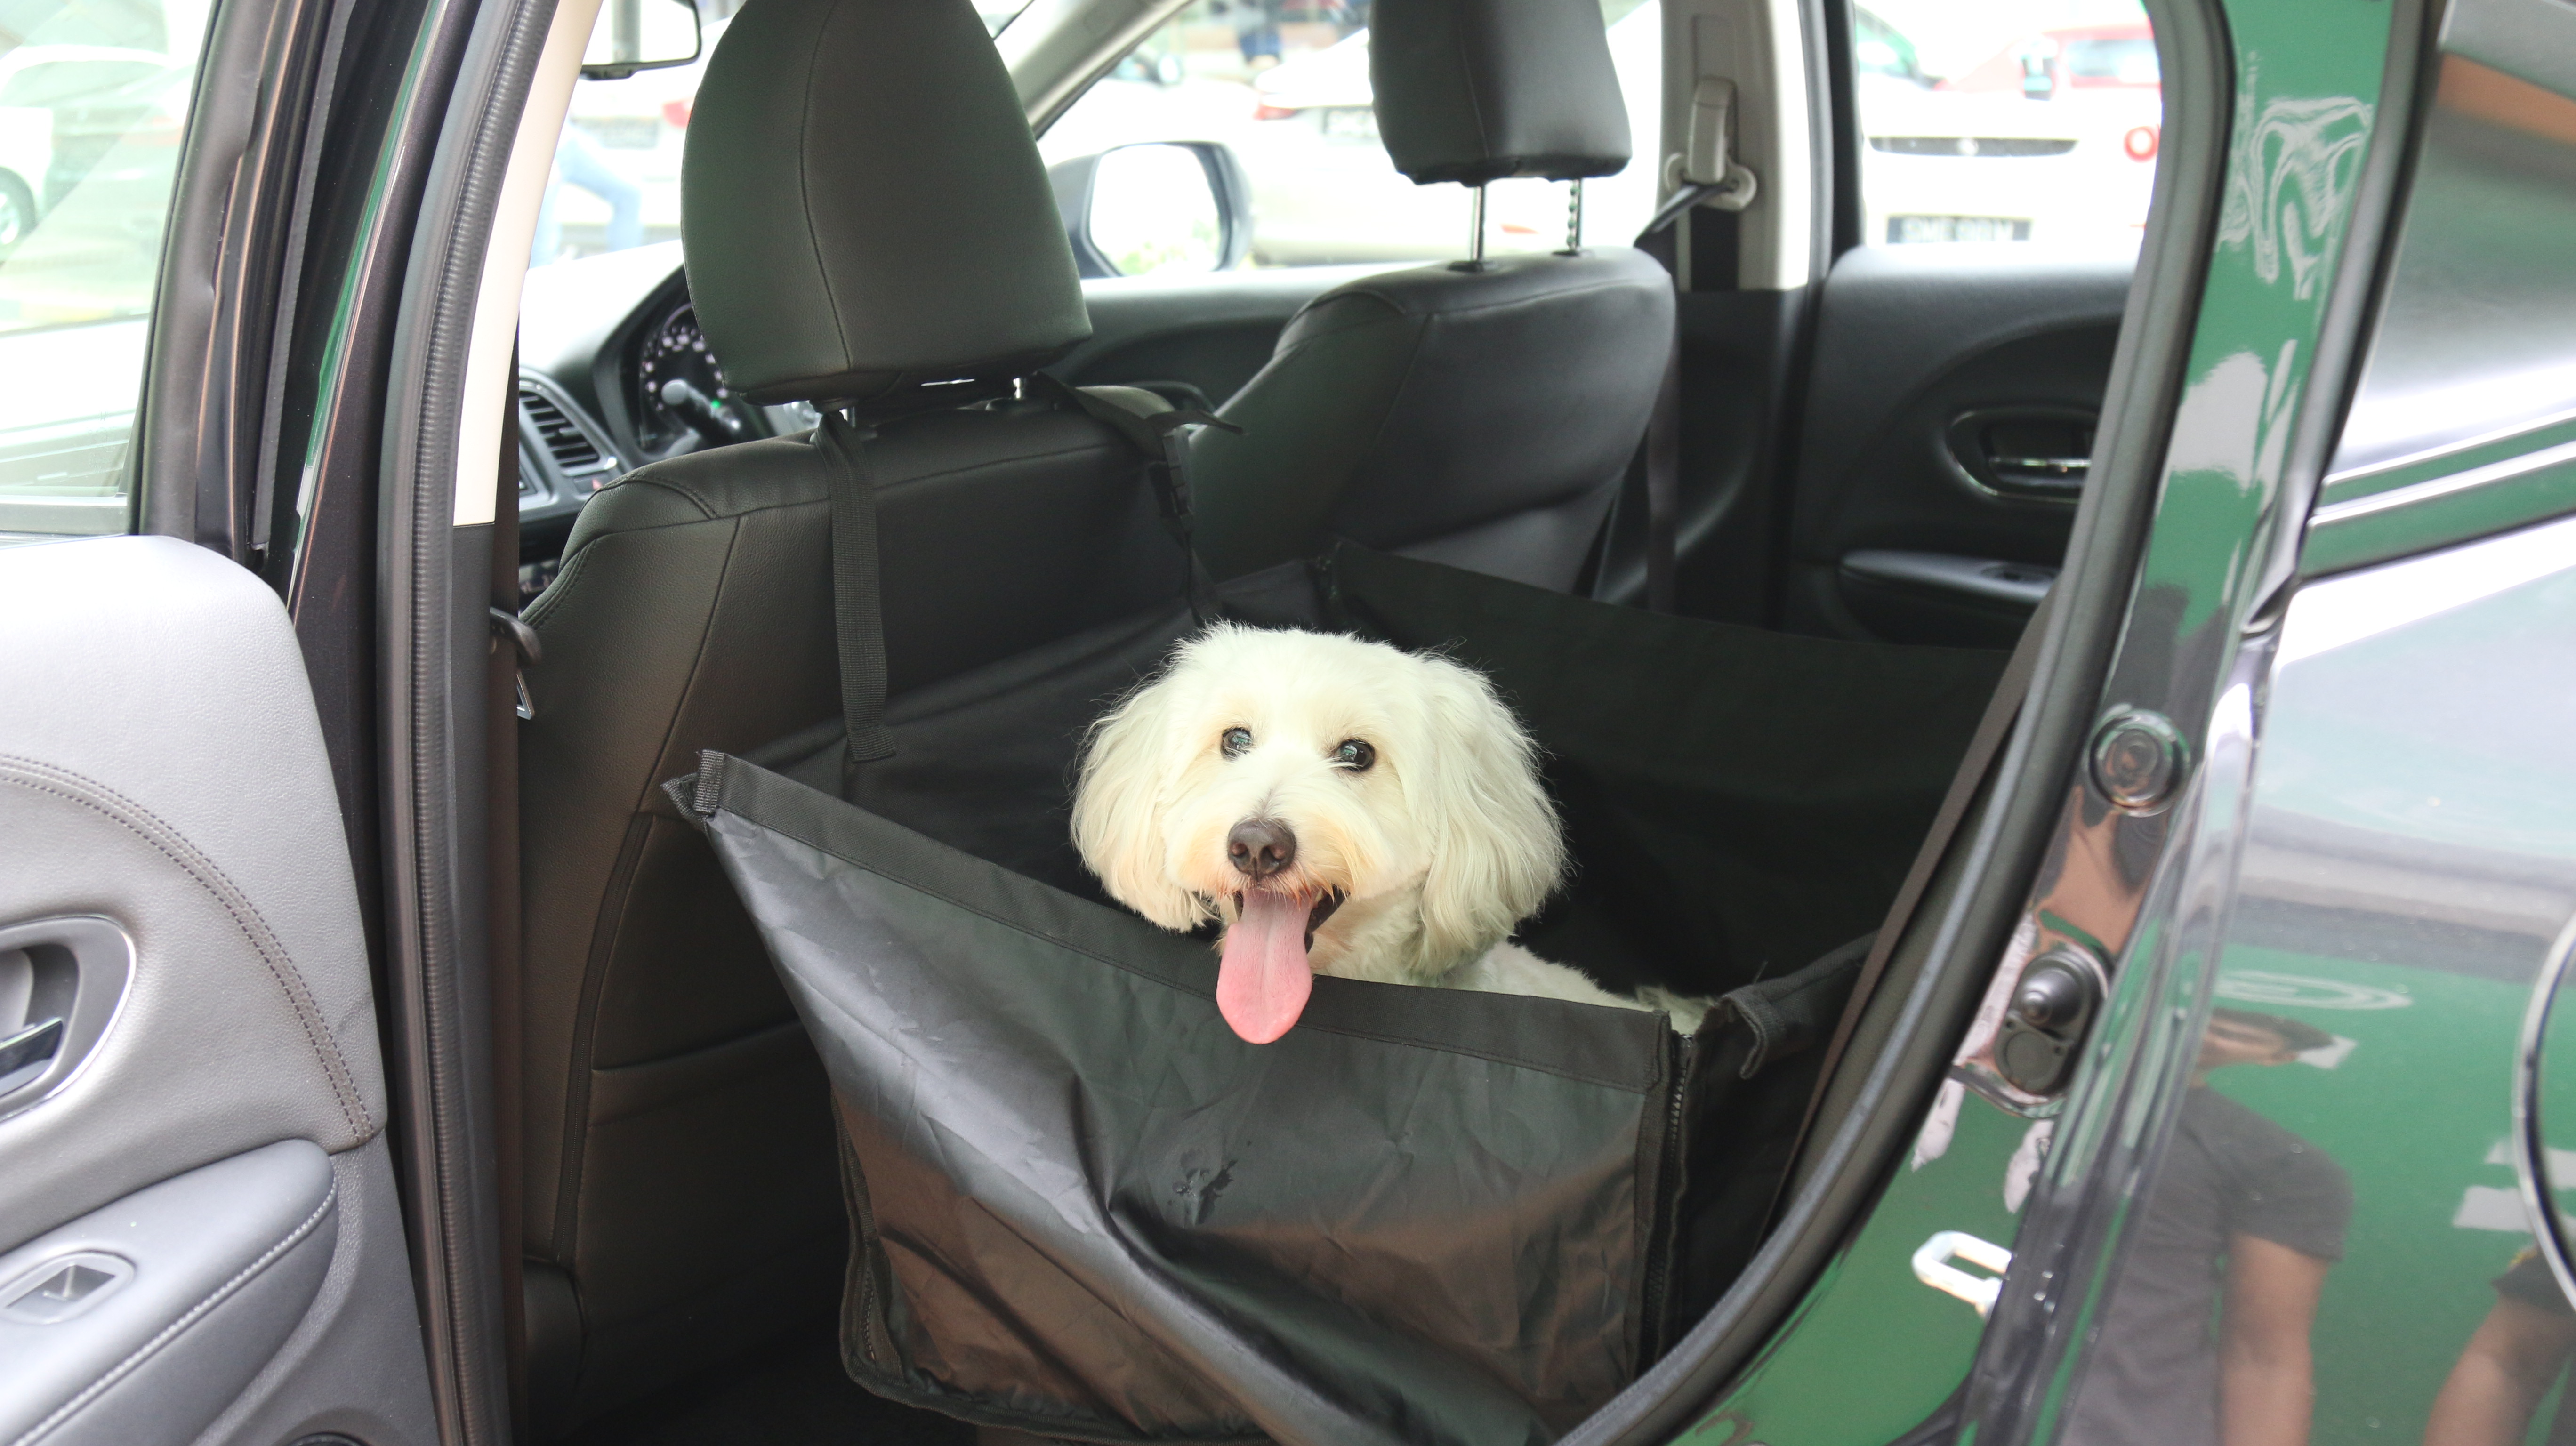 Grab launches GrabPet in Singapore to make traveling with your pet easier